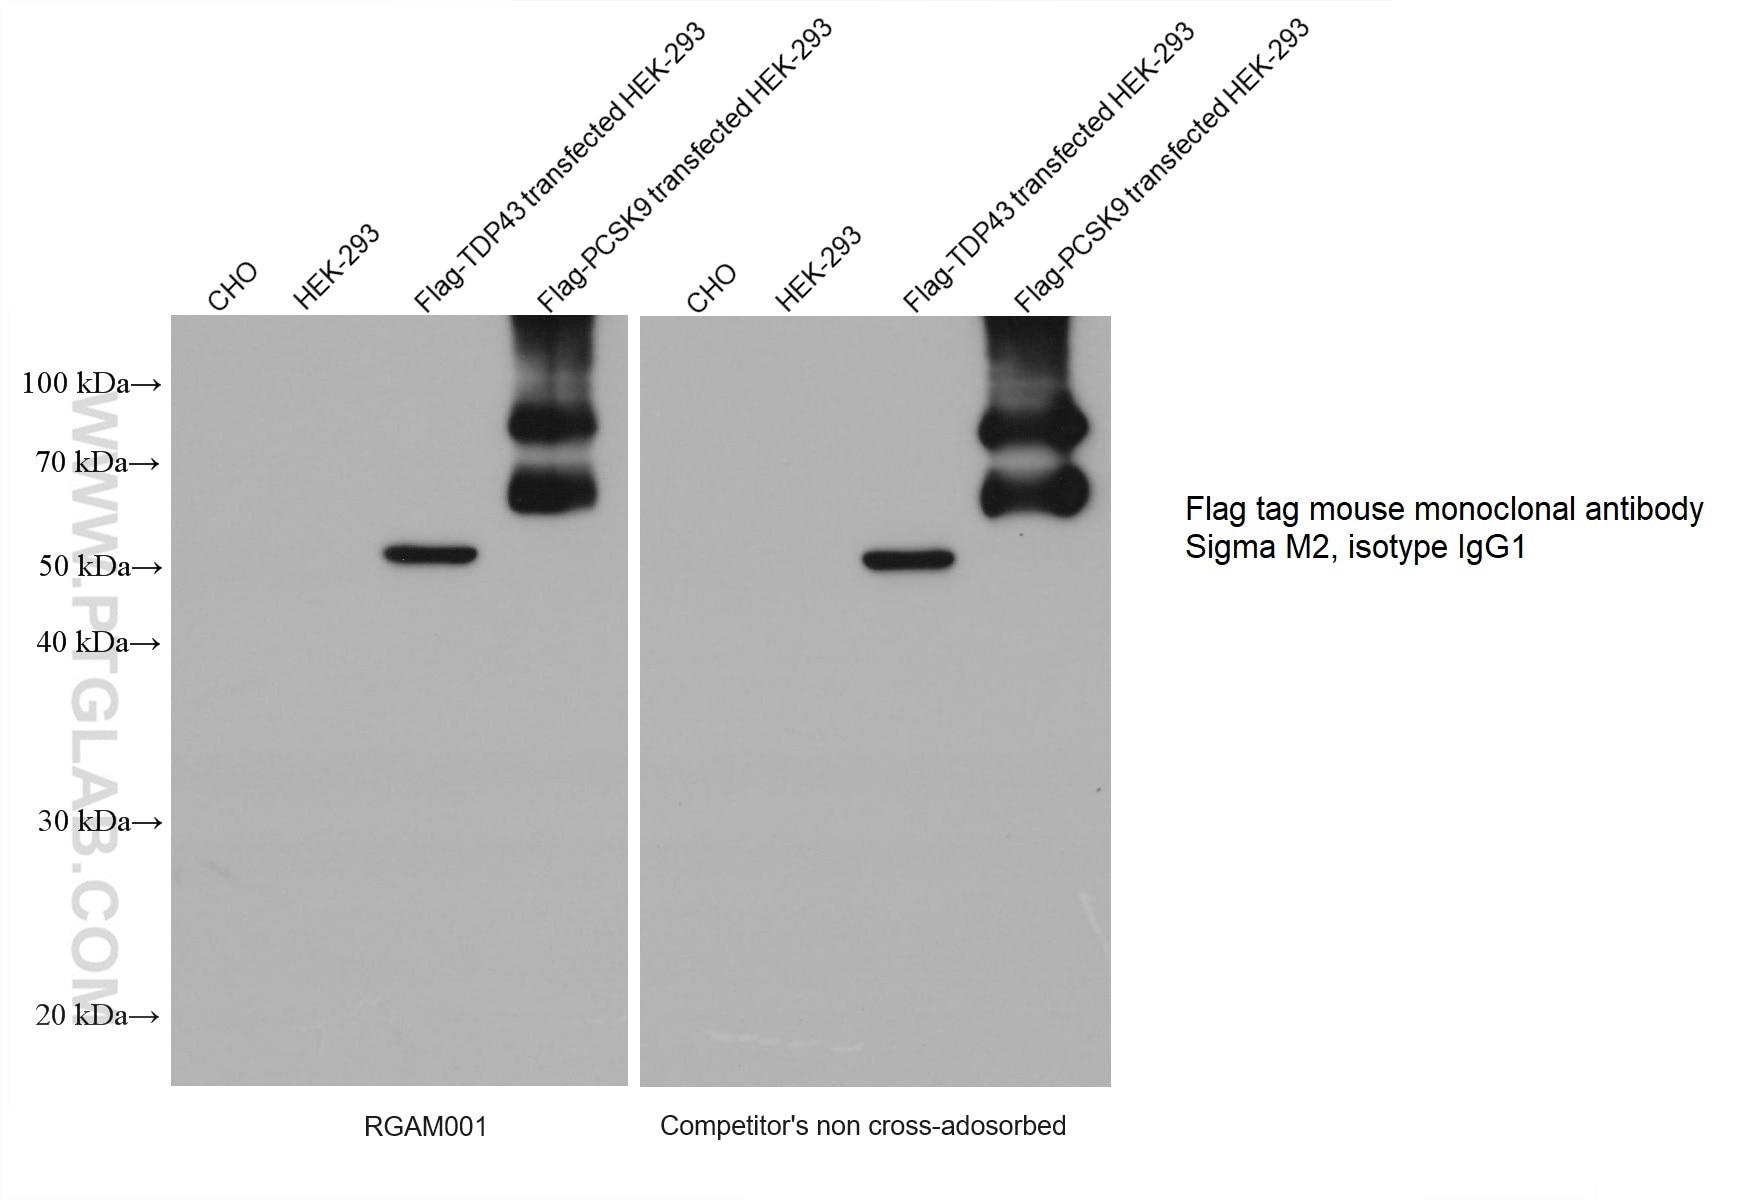 Various lysates were subjected to SDS-PAGE followed by western blot with Flag tag mouse monoclonal antibody (sigma M2, isotype IgG1) at dilution of 1:50000.  RGAM001 (left) and competitor’s non cross-adsorbed HRP-Goat anti-mouse (H+L) secondary antibody (right) were both used at 0.05μg/mL for detection. 